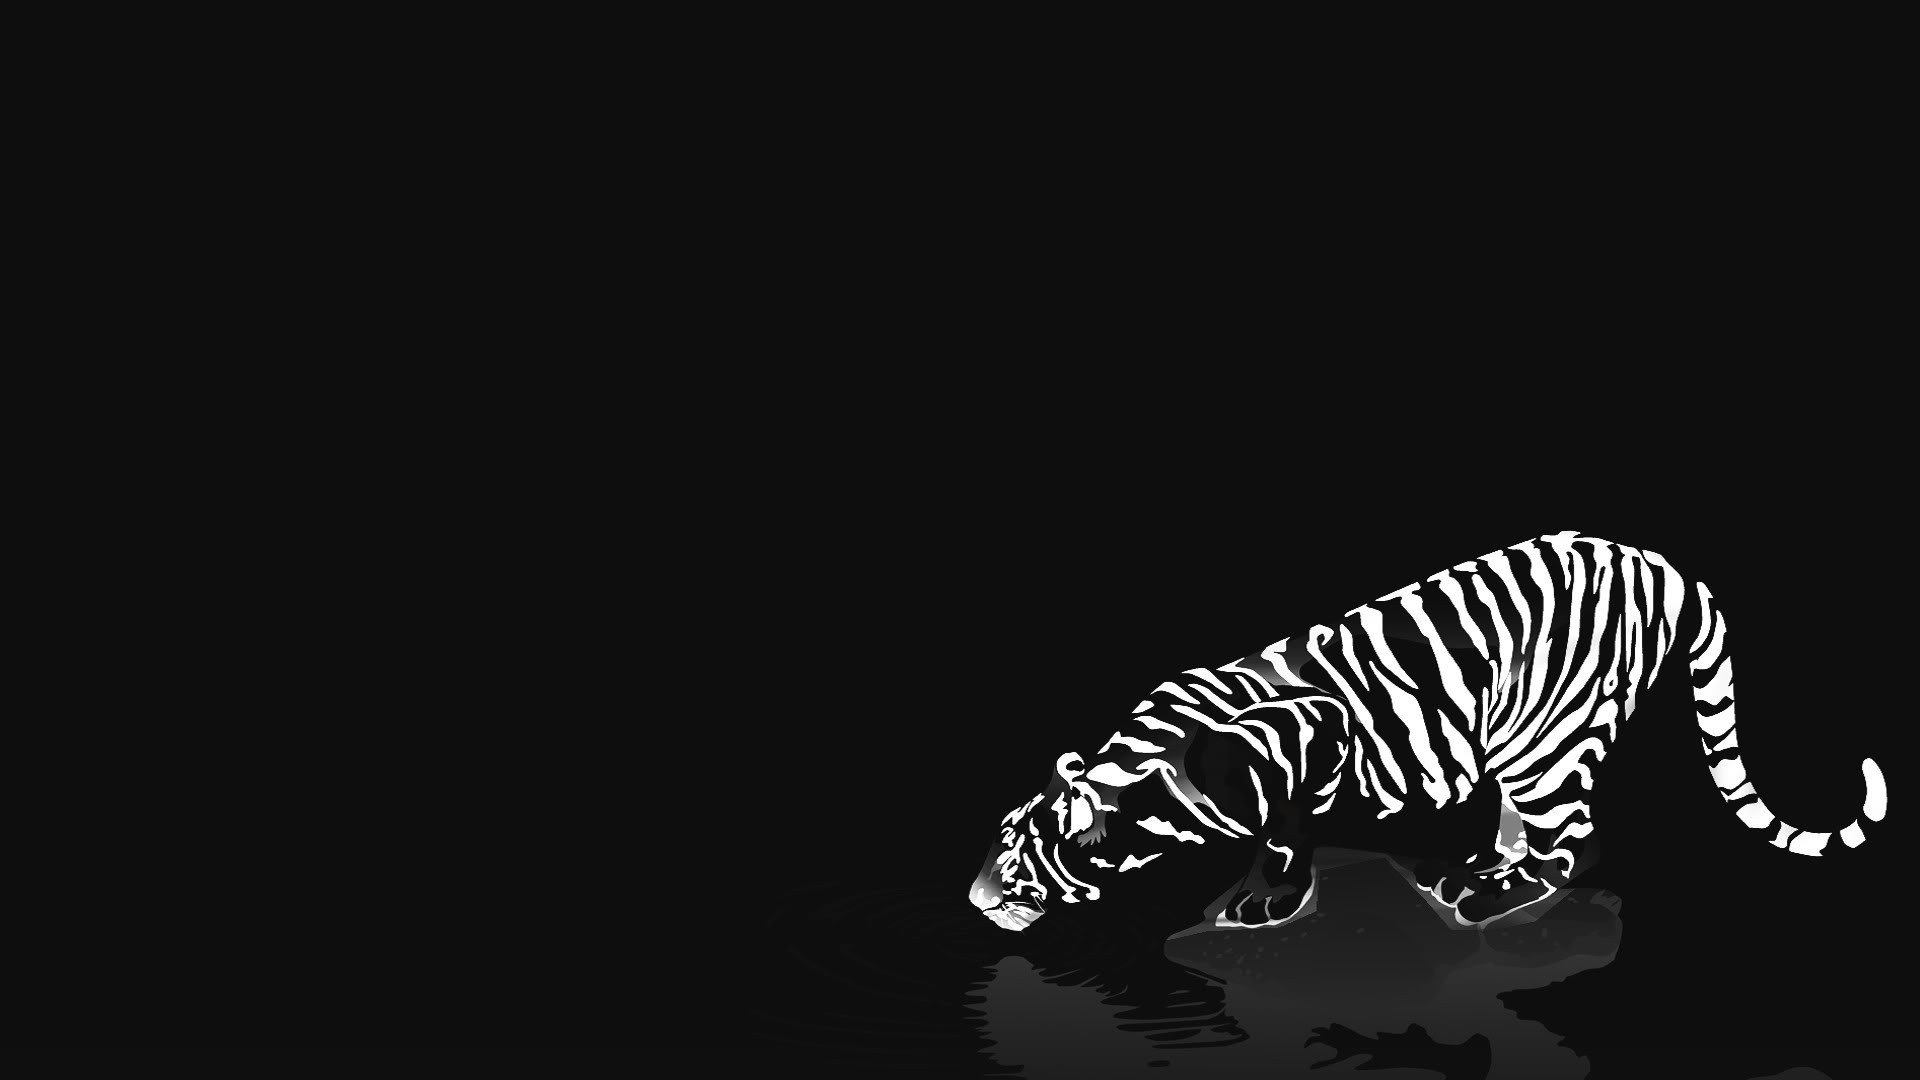 Tiger Stripes Wallpapers